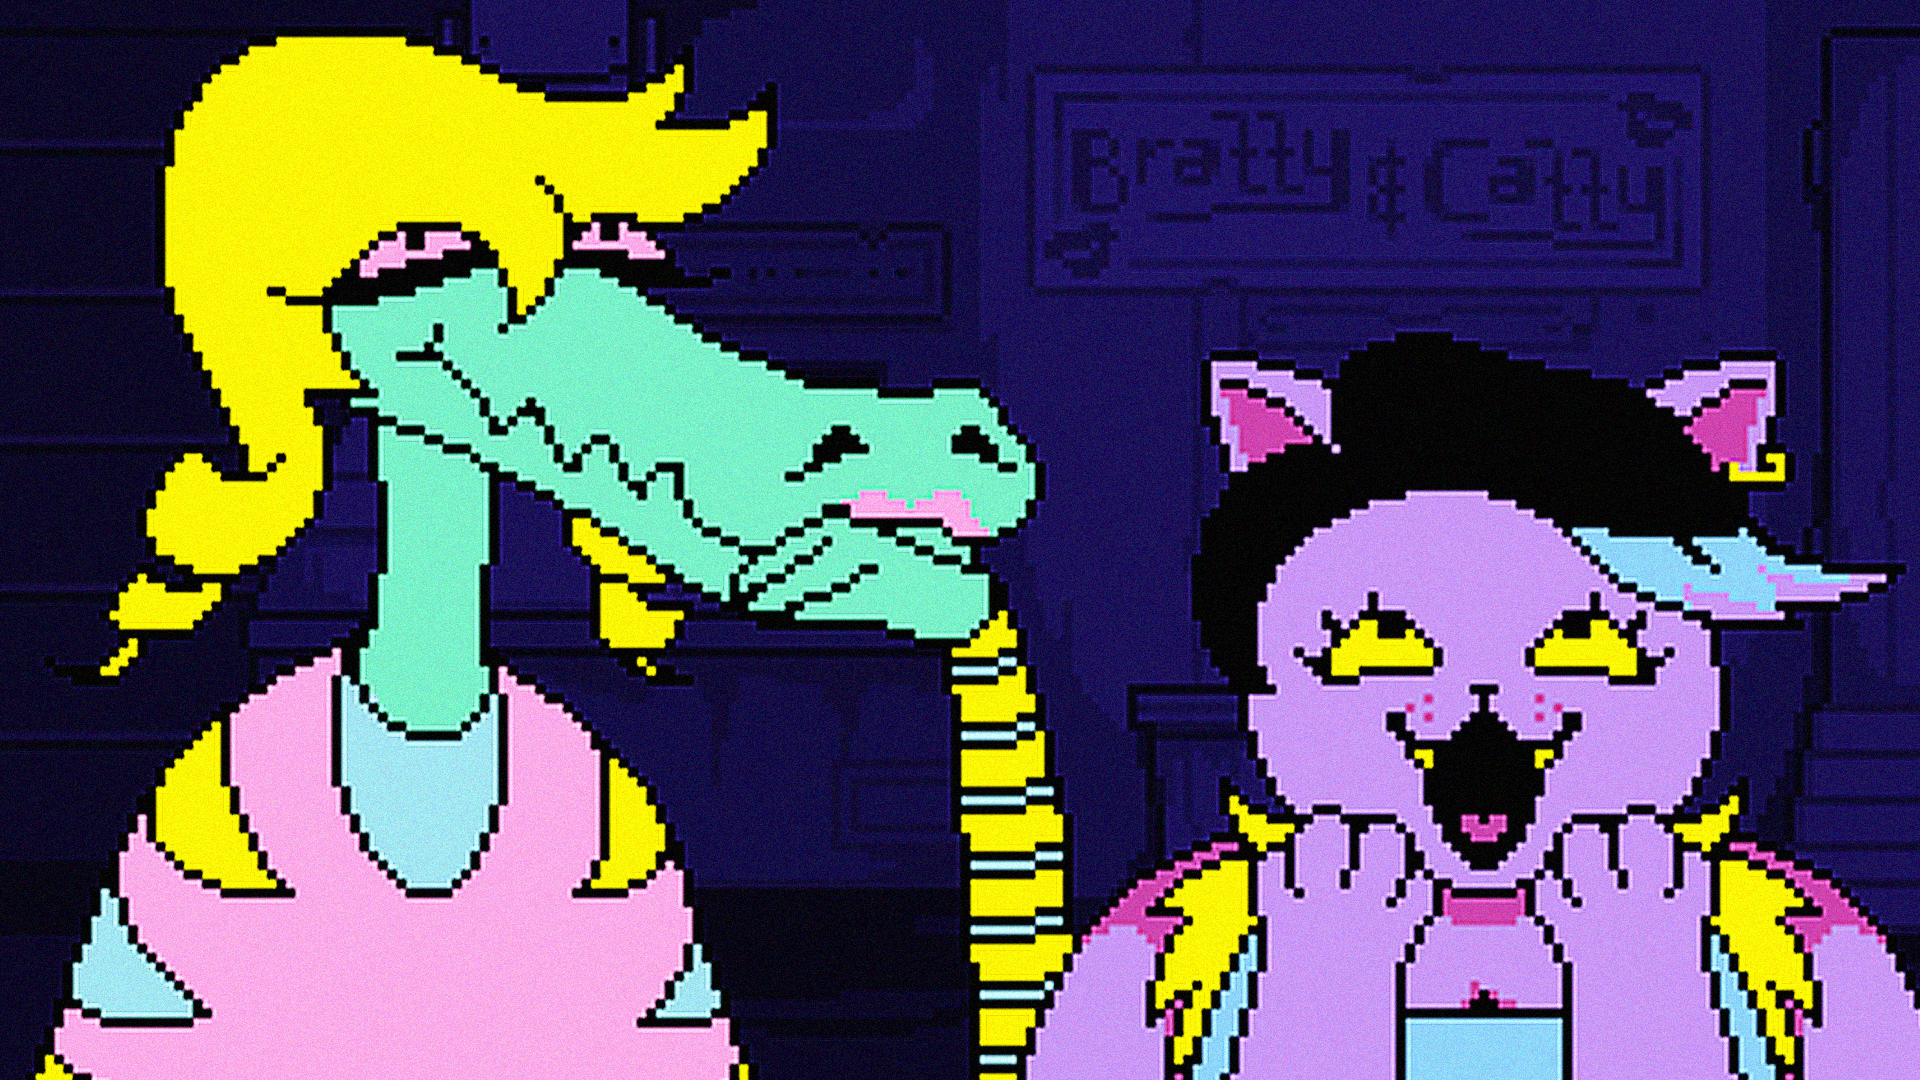 Two cartoon style characters from a video game: A green crocodile with a blonde wig and purple cat